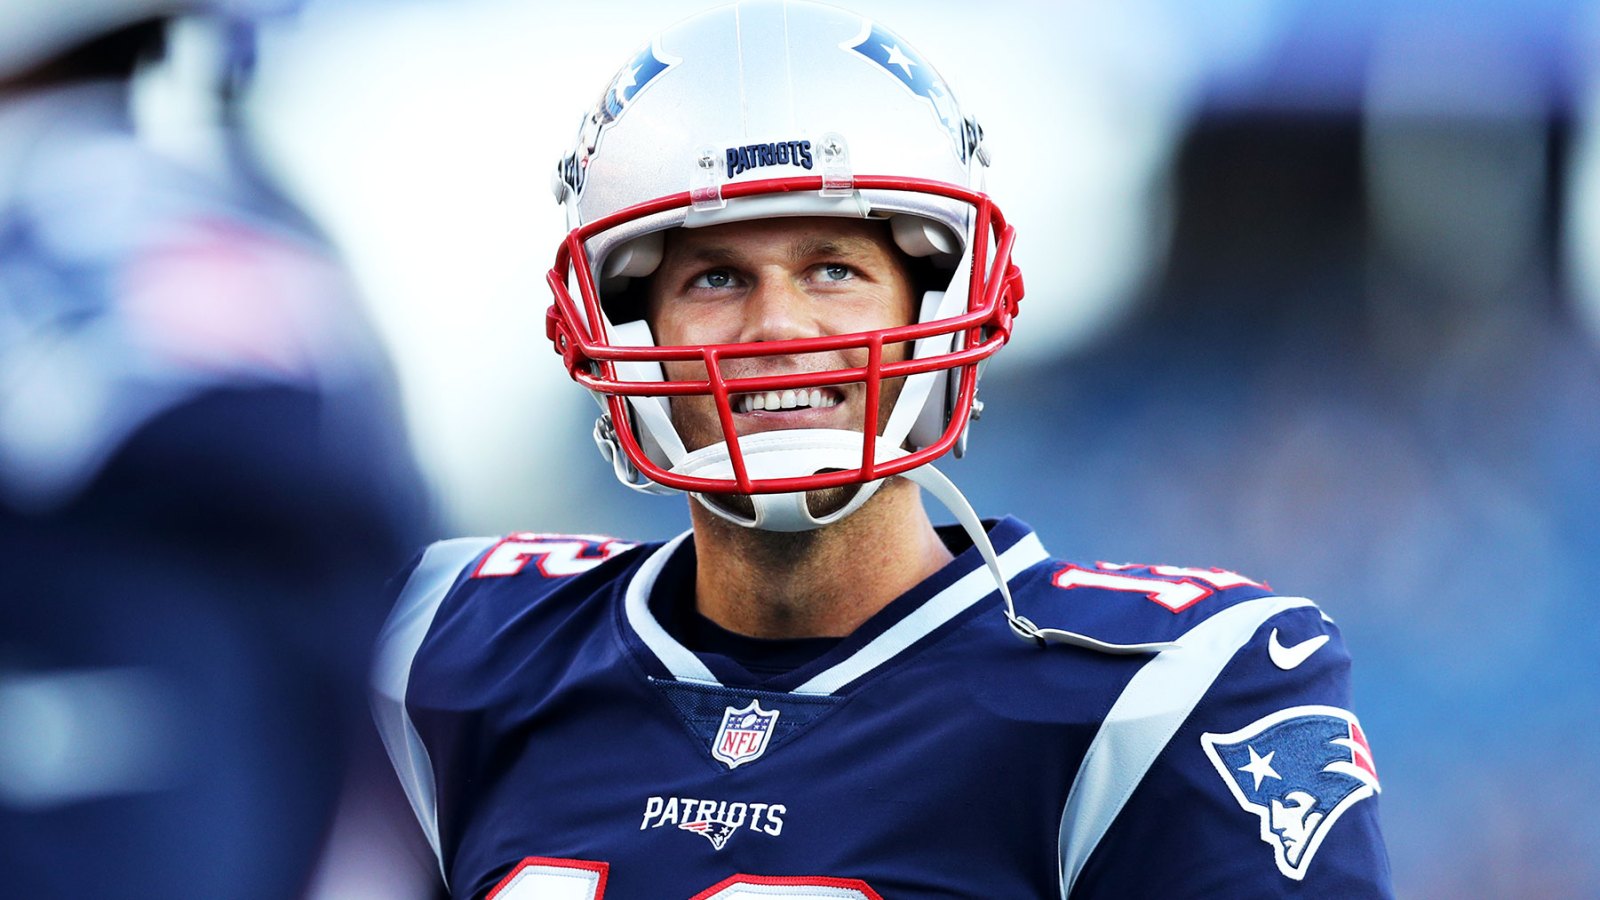 Tom Brady Joins Twitter on April Fools' Day, Says He Retiring